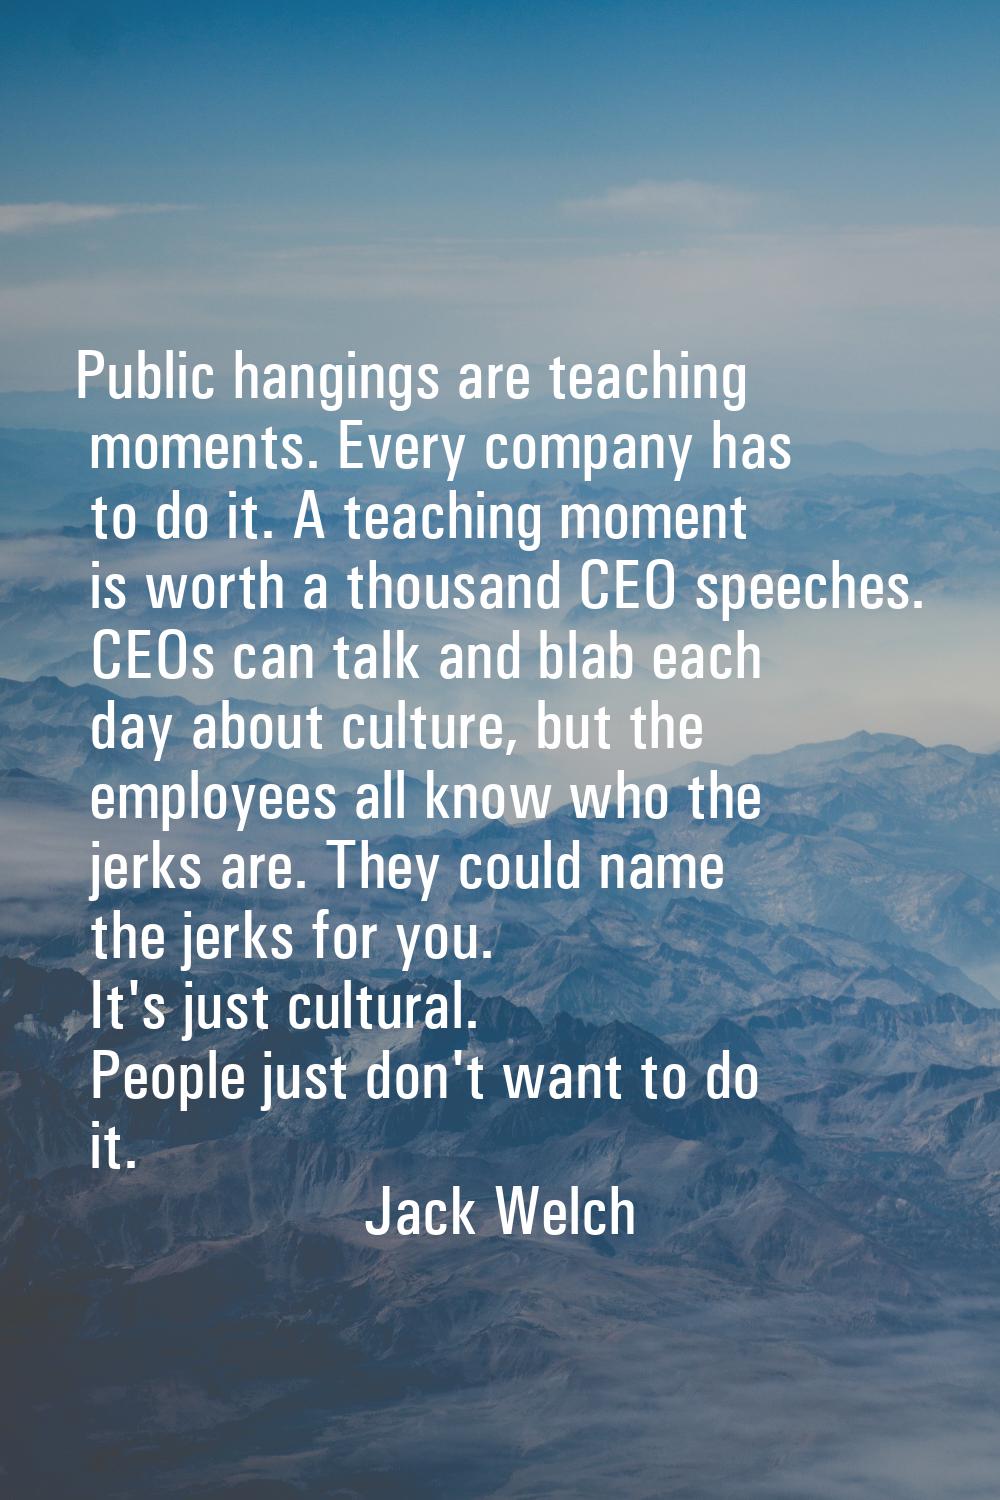 Public hangings are teaching moments. Every company has to do it. A teaching moment is worth a thou